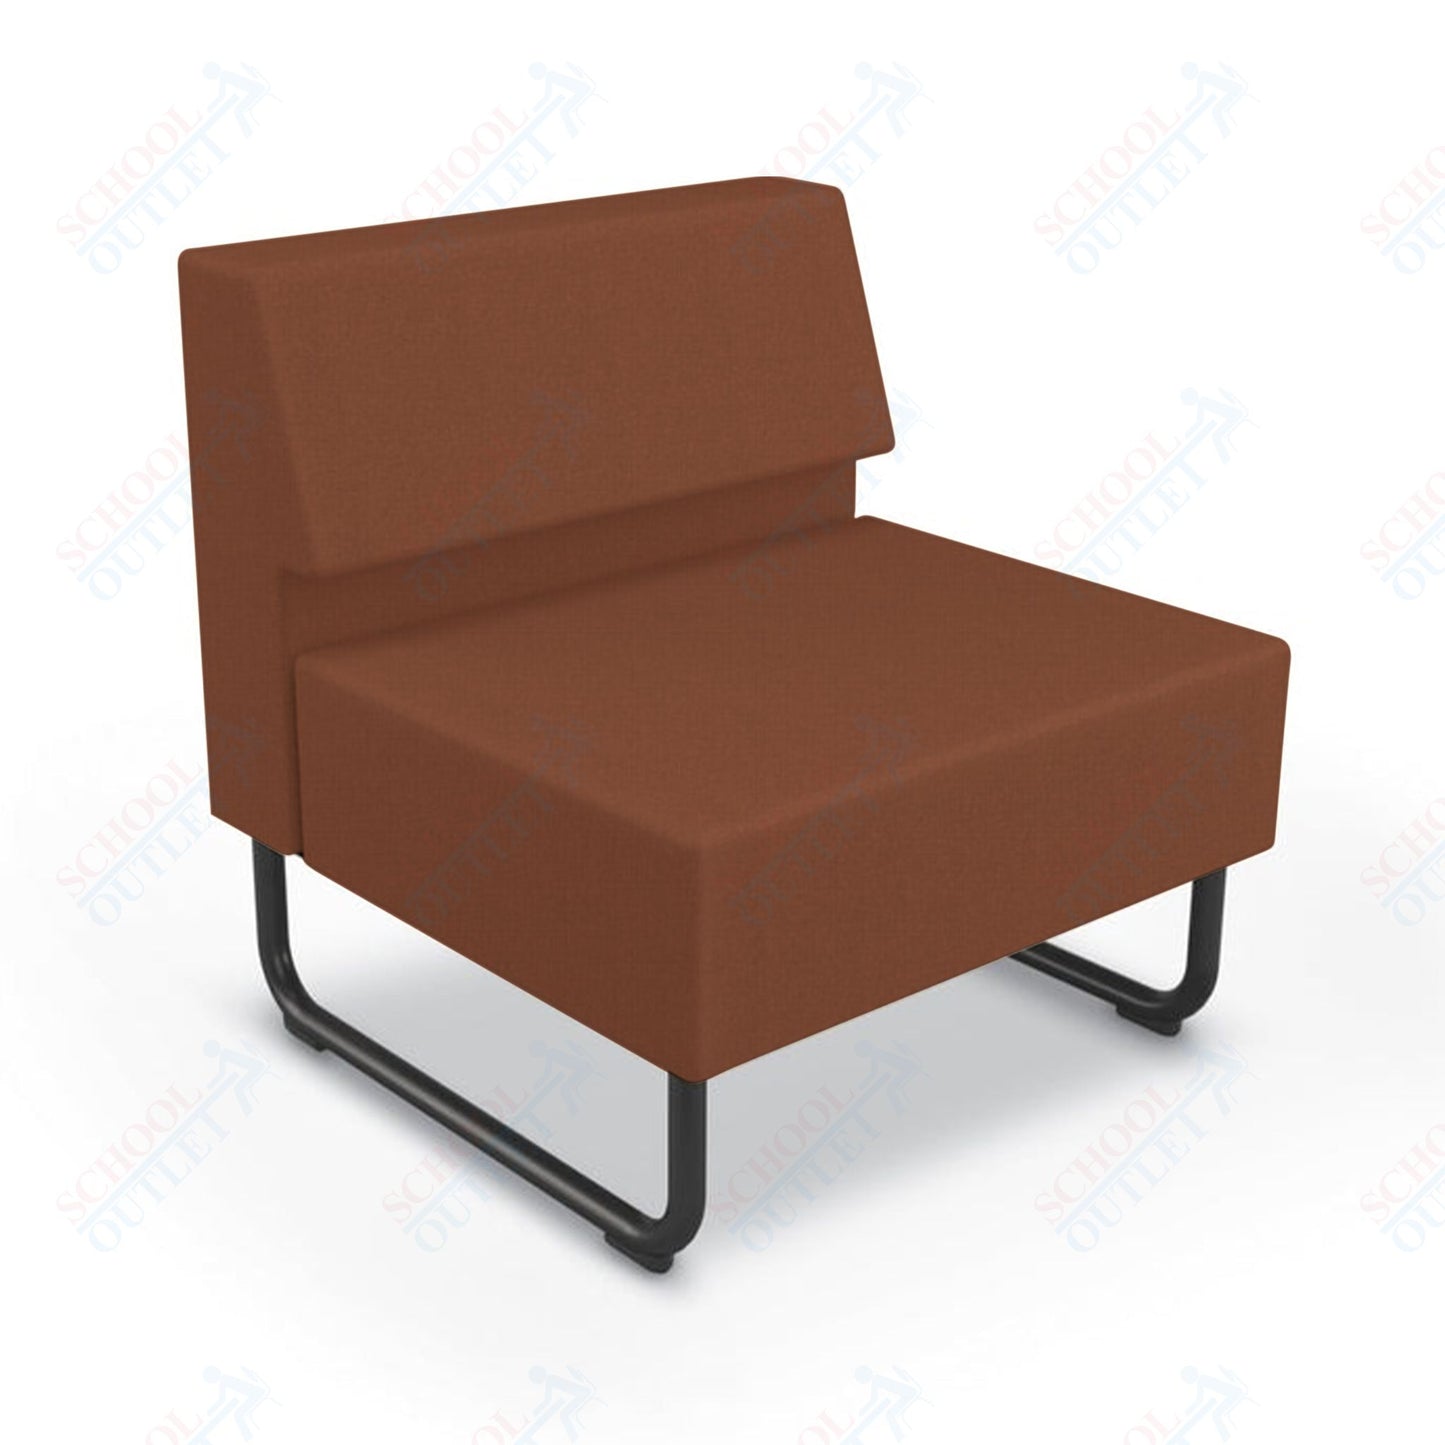 Mooreco Akt Soft Seating Lounge Chair - Armless - Grade 02 Fabric and Powder Coated Sled Legs